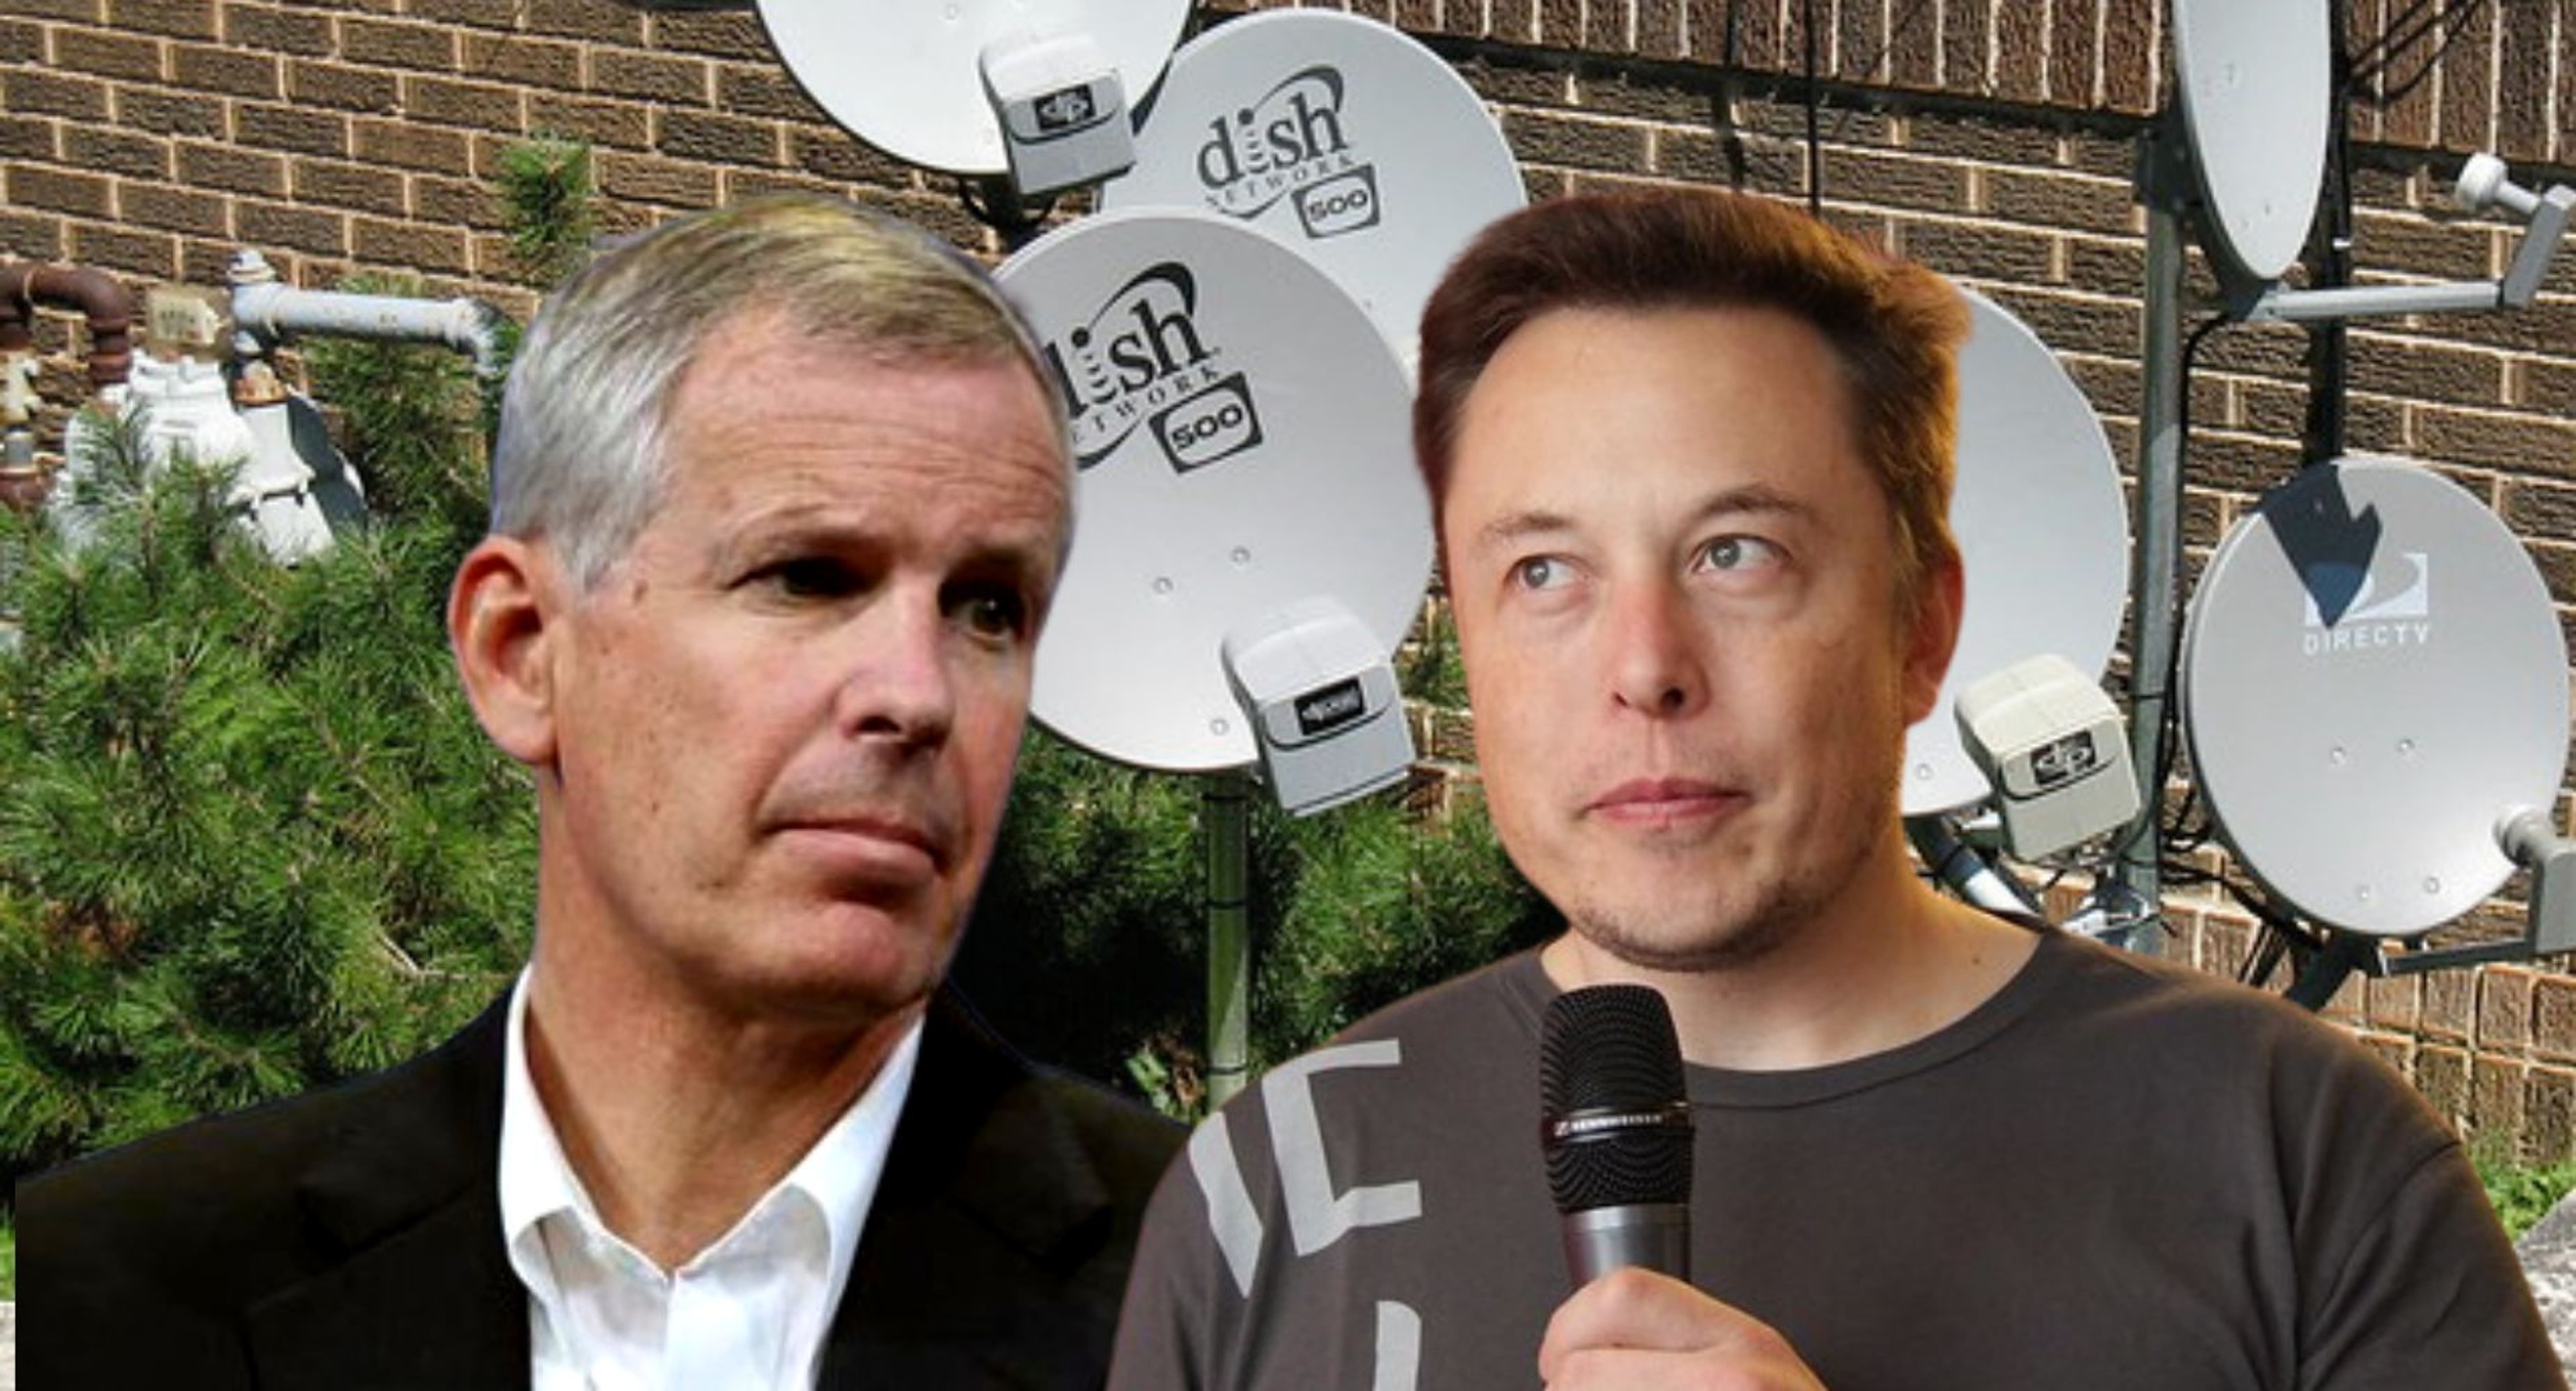 What&#39;s Going On Between Elon Musk And Dish Network CEO? &#39;Ergen Is Trying to Steal The 12GHz Band&#39;